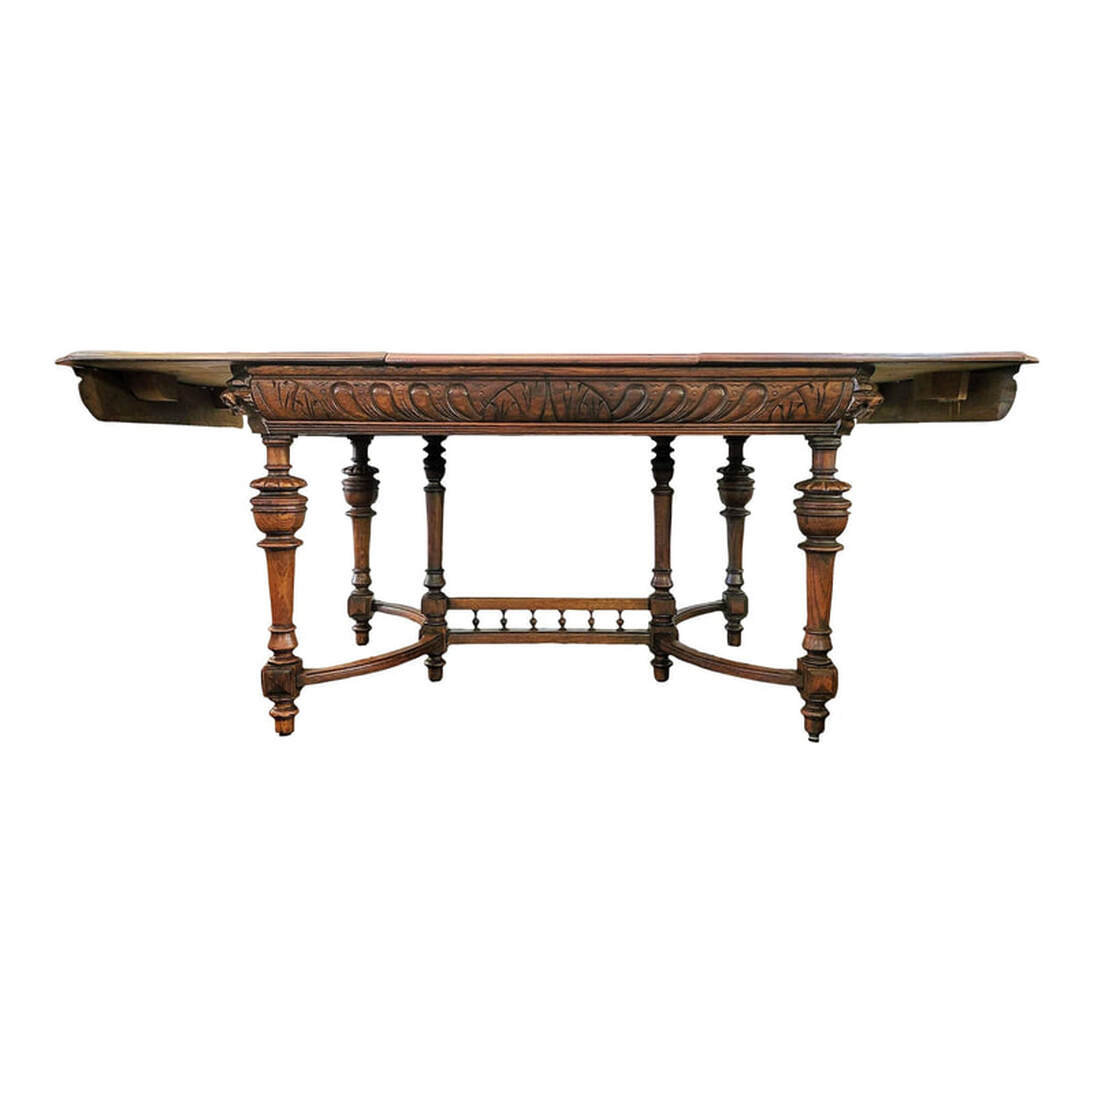 Well-crafted, beautiful, and sturdy carved oak dining table made in Mechelen, Antwerp, Belgium, circa 1900.  The closed table top is built from quarter-sawn oak wood, sometimes called tiger oak for the golden rays in the figure. The table top shows a seam down the middle. This is where the two ends of the top open for leaf placement. The table top edges are molded and match the molding on the ends of the table leaf. The corners are canted.  The table leaf is made from burl figure oak wood and has a finished molded edge to match the two halves of the table top. The leaf is placed in between the two halves of the table top to extend the length of the table. Underneath the center top on each side are round brass latches that lock the table top in place. We installed these latches. They easily unlatch to open the table for leaf placement. The steel plate at center is part of the old latching system and shows how a bar would have run through to hold the table top in place.  The table apron is embellished with carved arches and gadrooning with a molded bottom edge. The four canted corners are inset with carved blocks featuring projecting lion's heads. The holes through the mouths indicate the lion's heads once had hanging rings, a mask and handle motif dating back to ancient Rome and representative of strength, courage, and majesty.  The four oak corner legs and the two center legs are tapered over square blocks embellished with layered geometrics, turned, ringed, and carved, and end in turned, ringed arrow feet.  The Flemish style curved stretchers on each end attach to the square blocks on the legs.  The trestle is set between the two center legs and features a gallery of six turned wood Greek urn or amphorae shaped elements.  SIZE:  CLOSED:  50